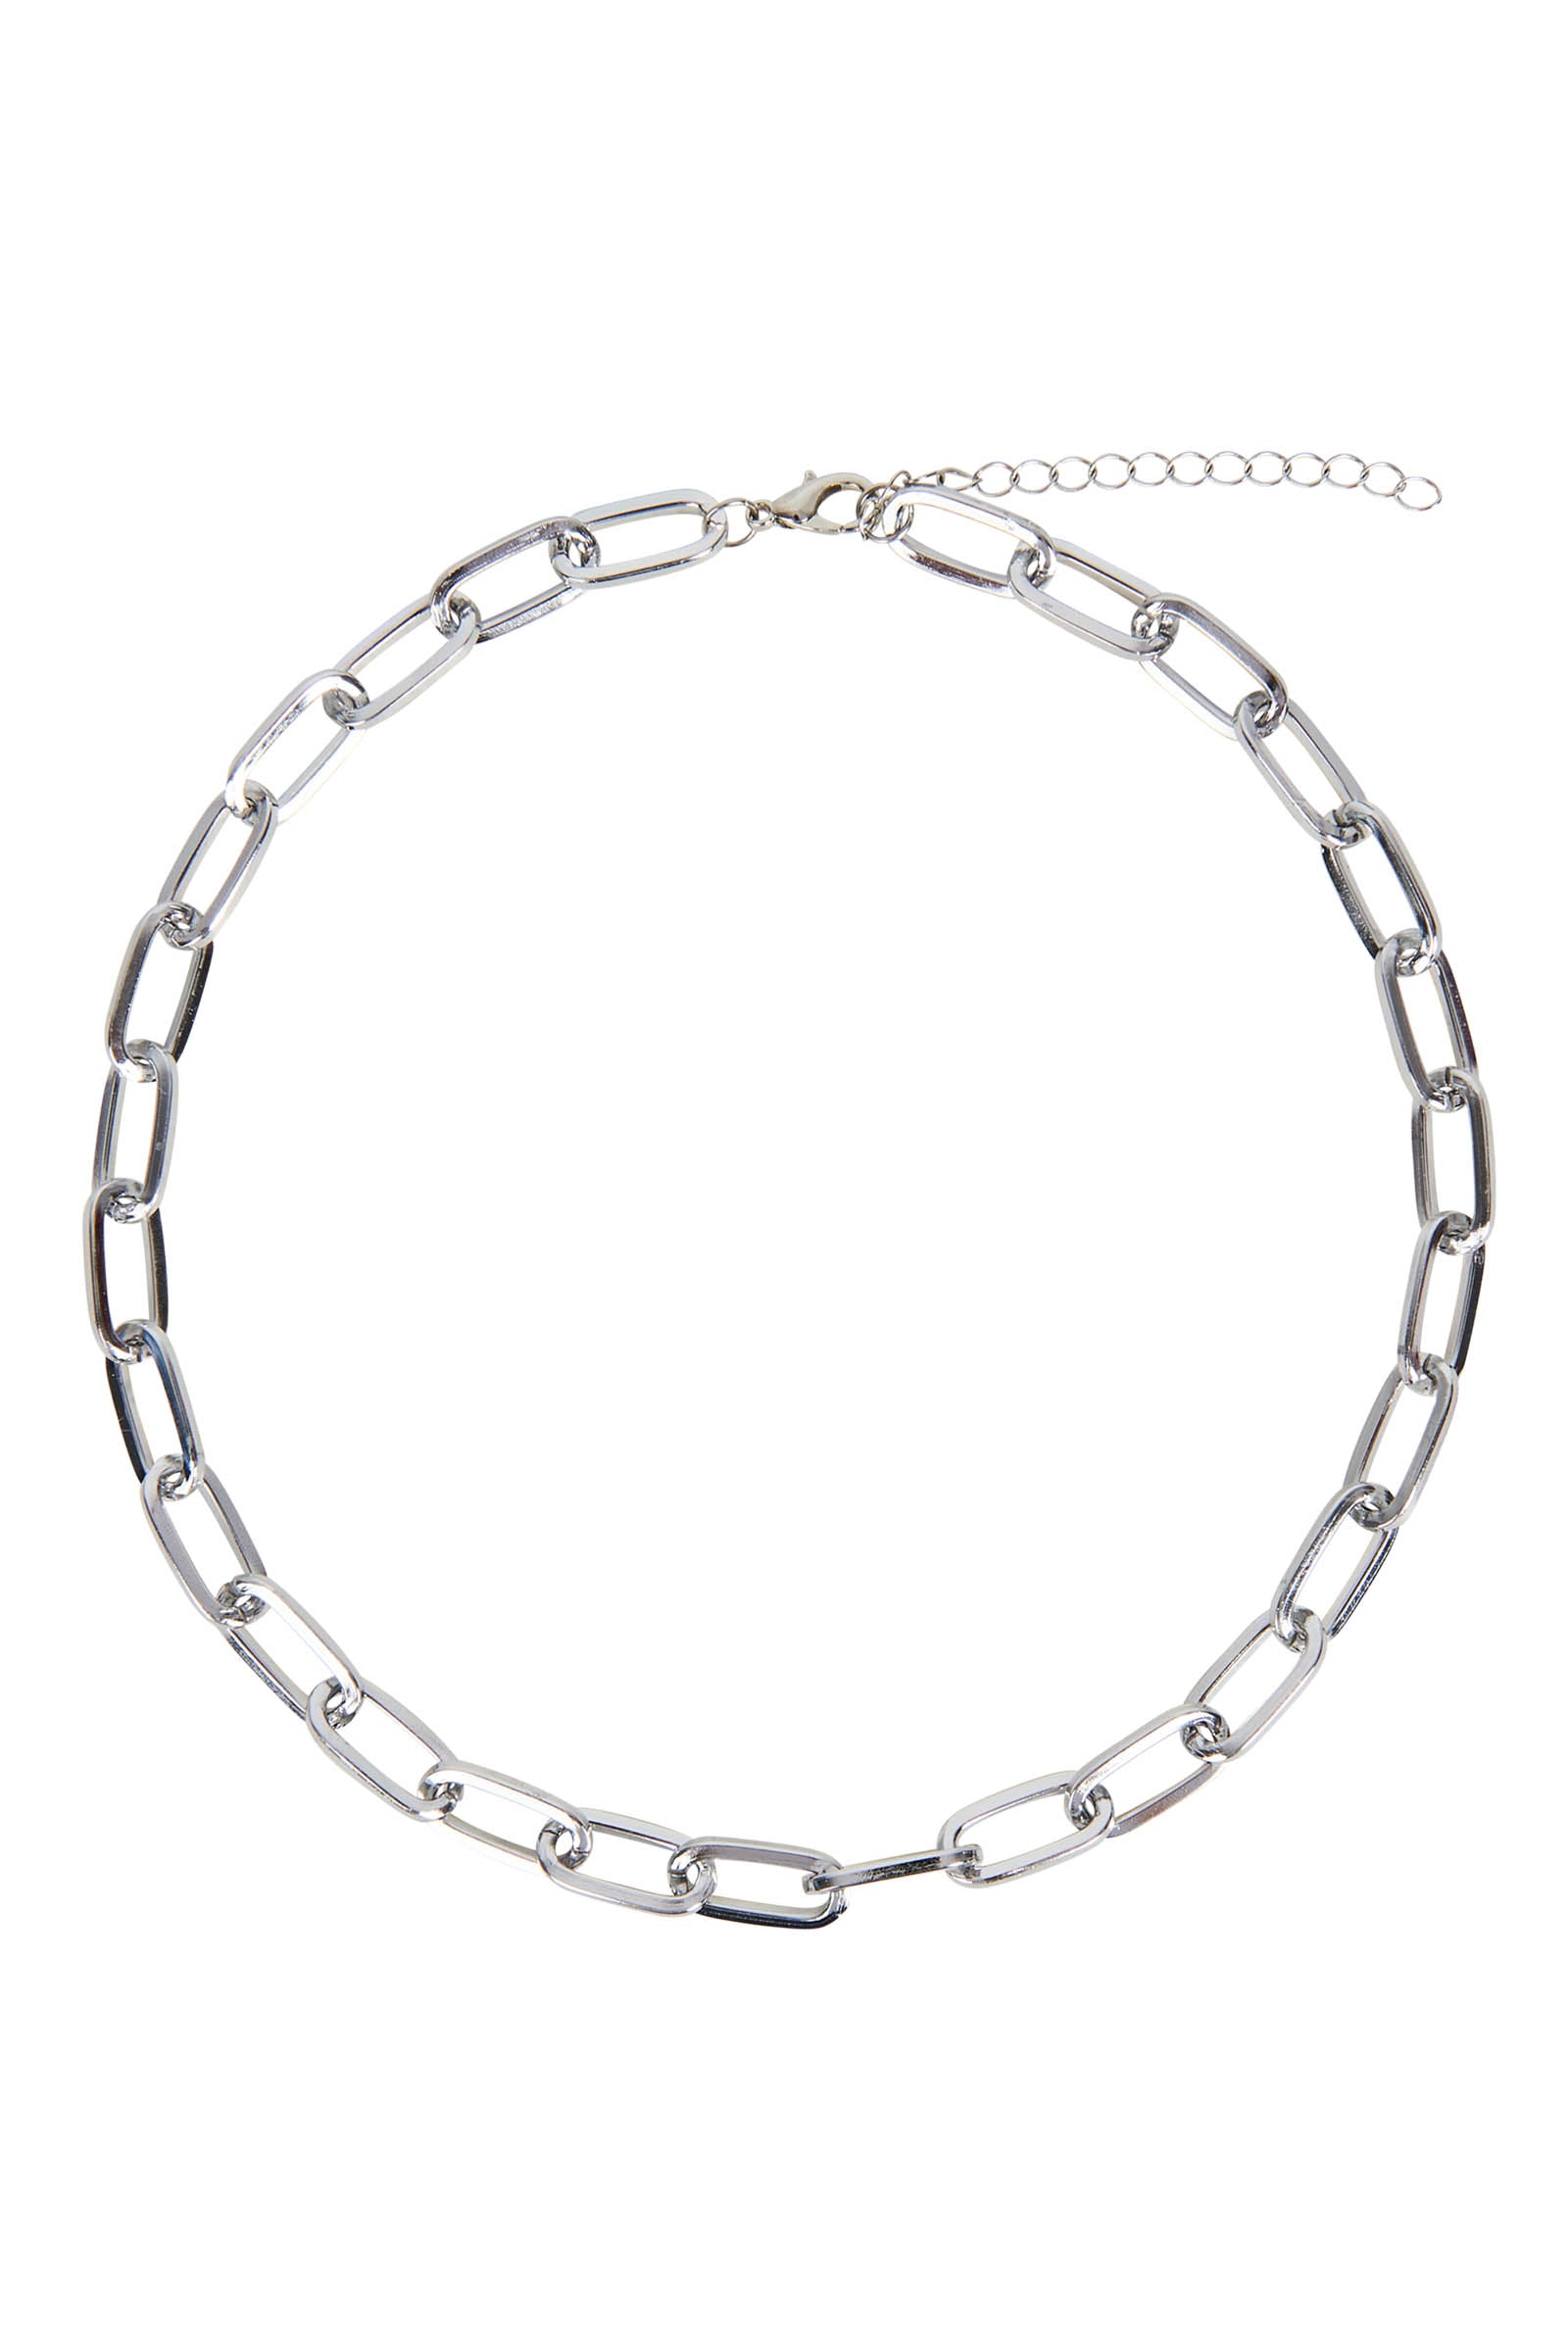 Serenity Necklace - Silver - eb&ive Necklace